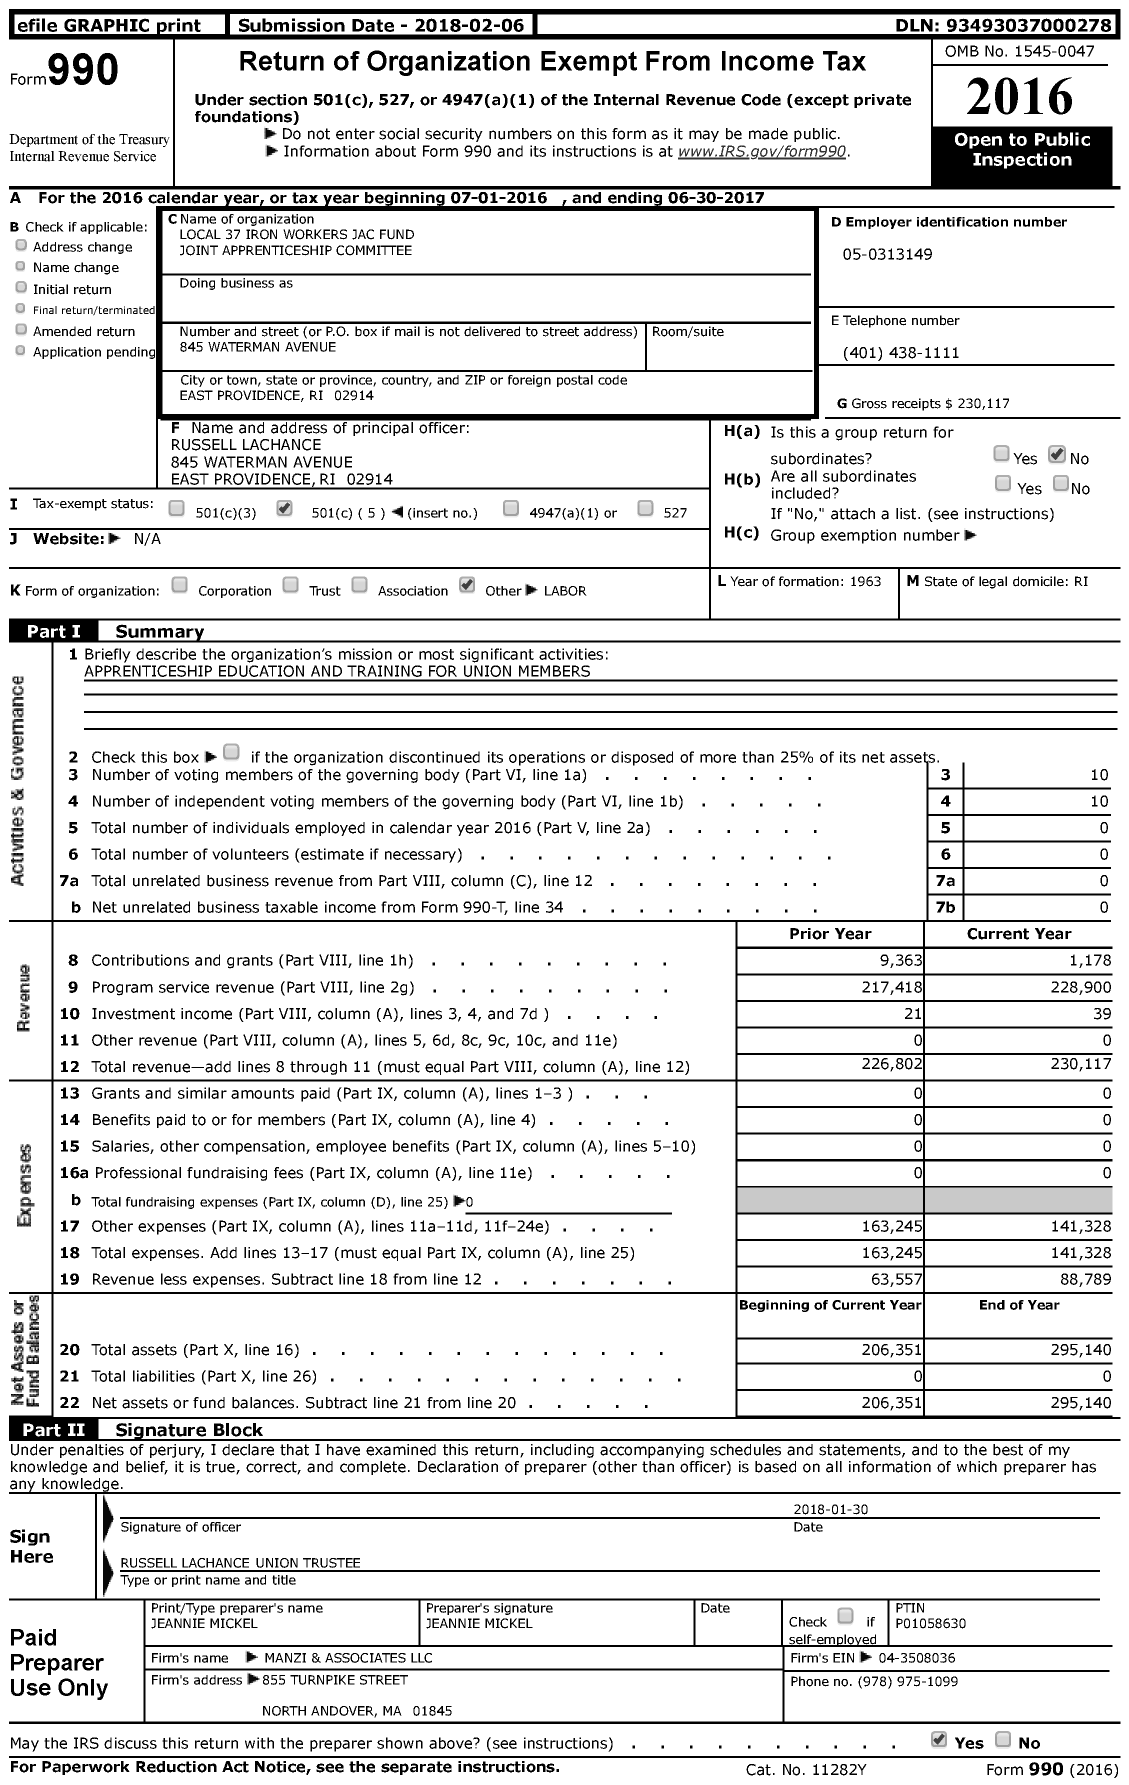 Image of first page of 2016 Form 990 for Local 37 Iron Workers Jac Fund Joint Apprenticeship Committee